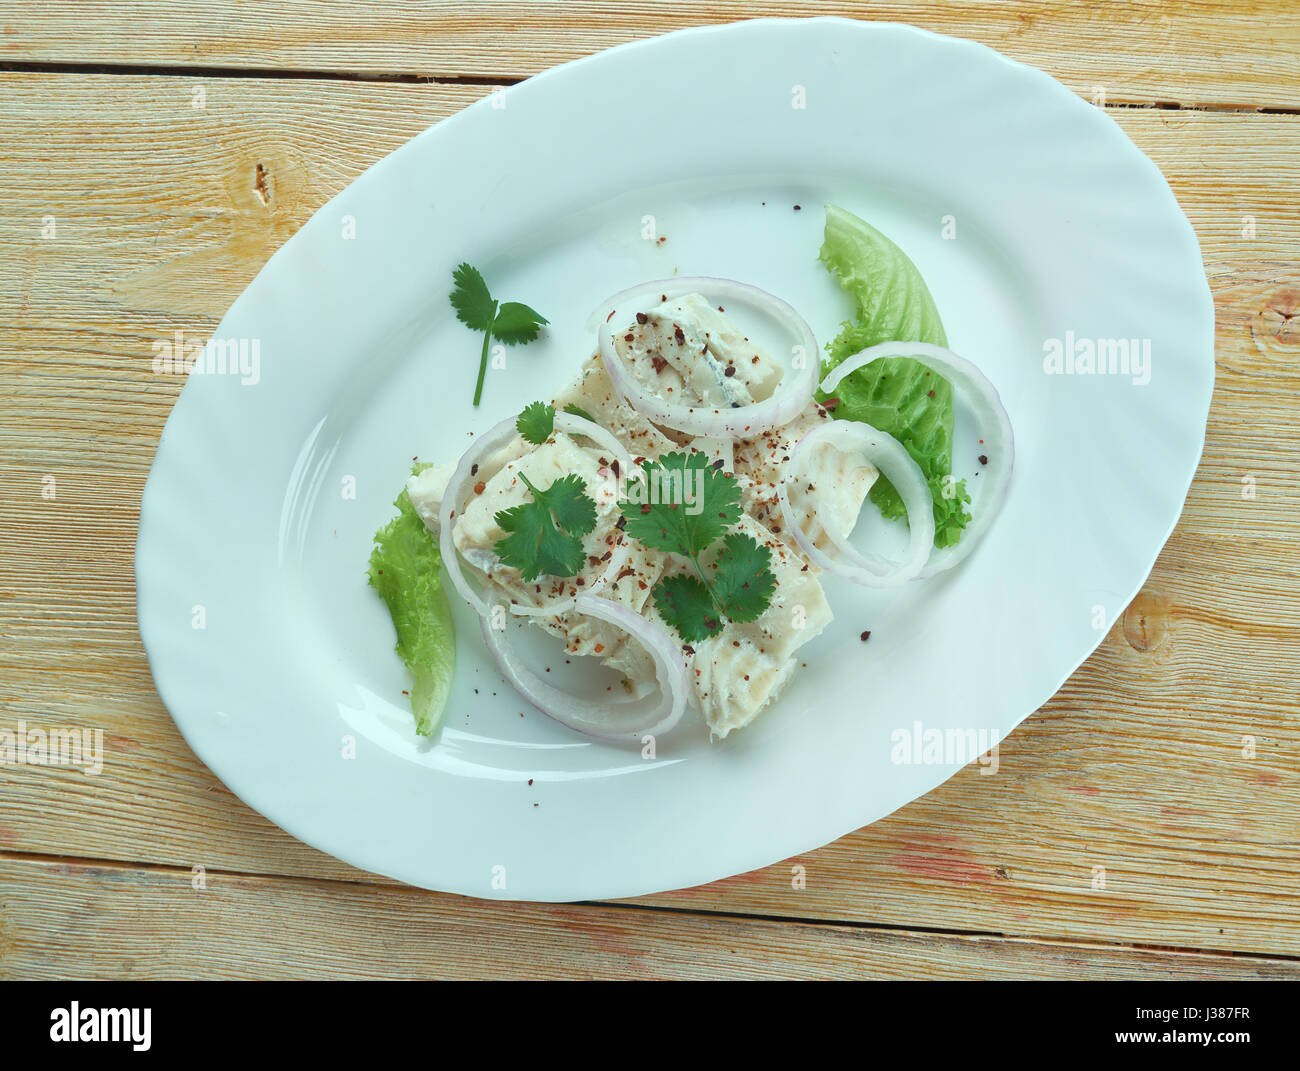 Sea bass ceviche on a White Plate. Stock Photo